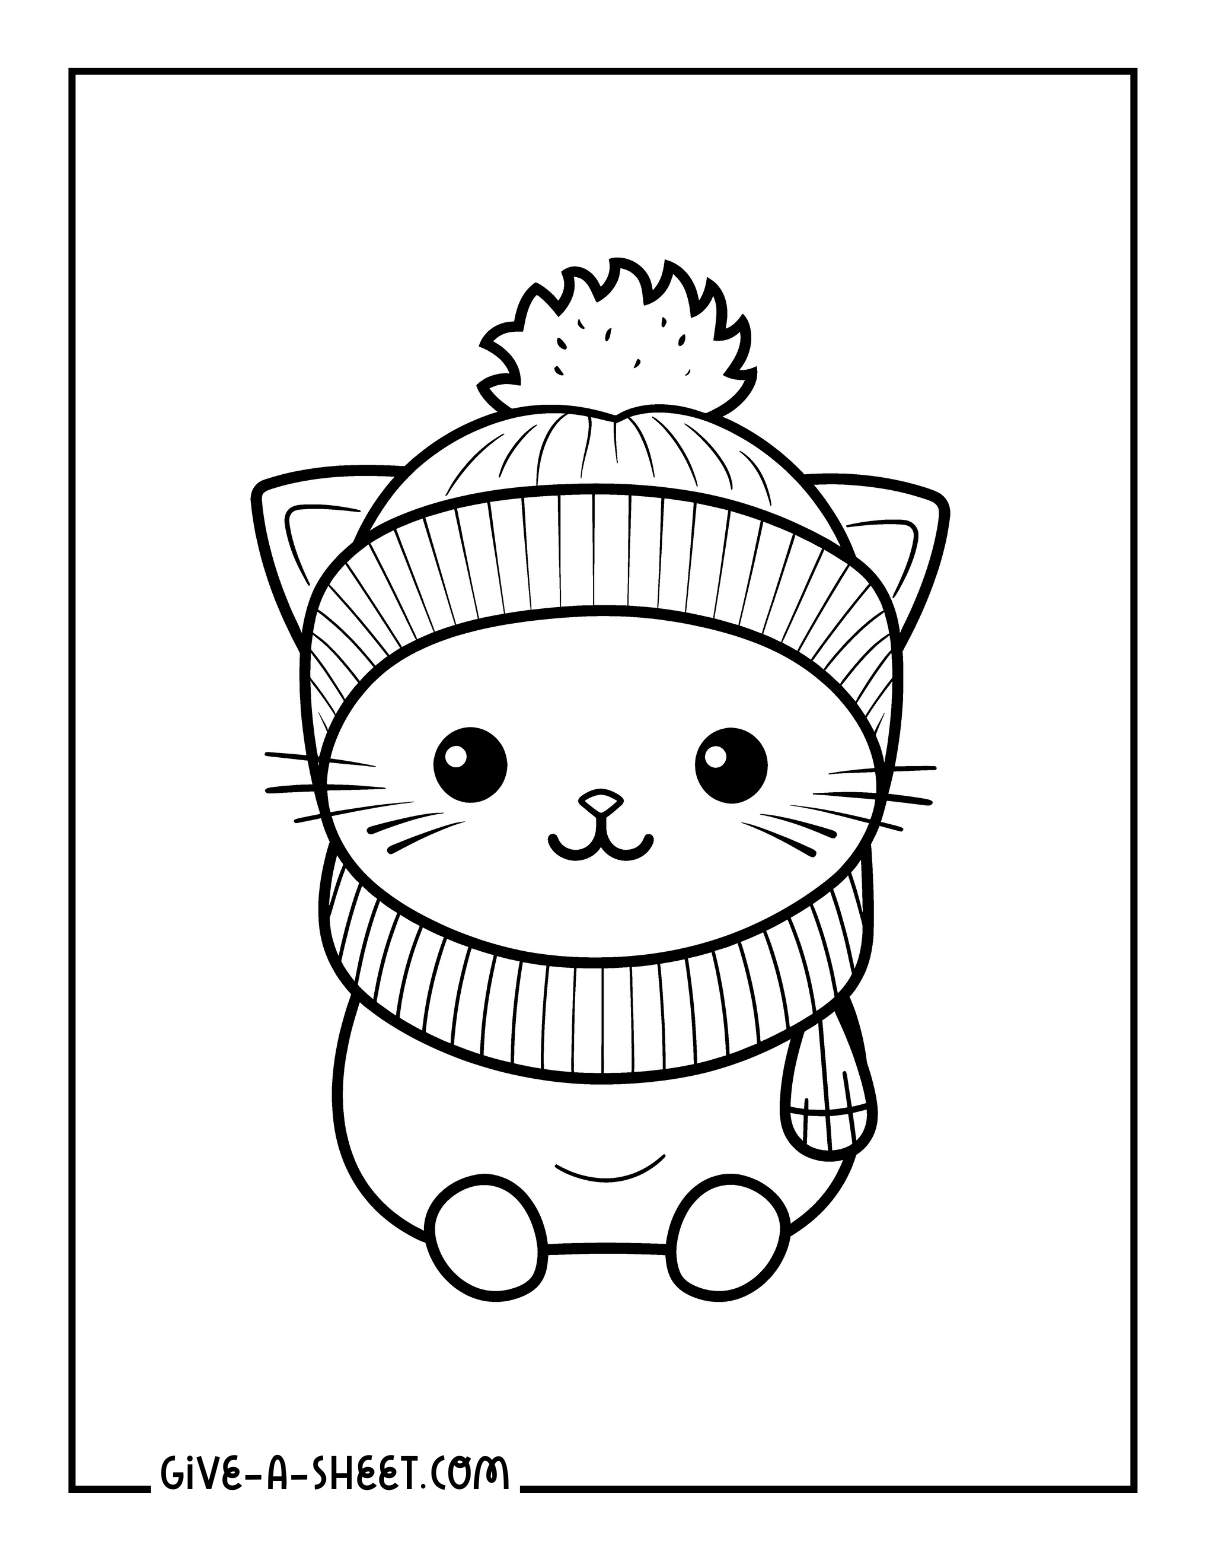 Kitten wearing warm hat for winter coloring page.